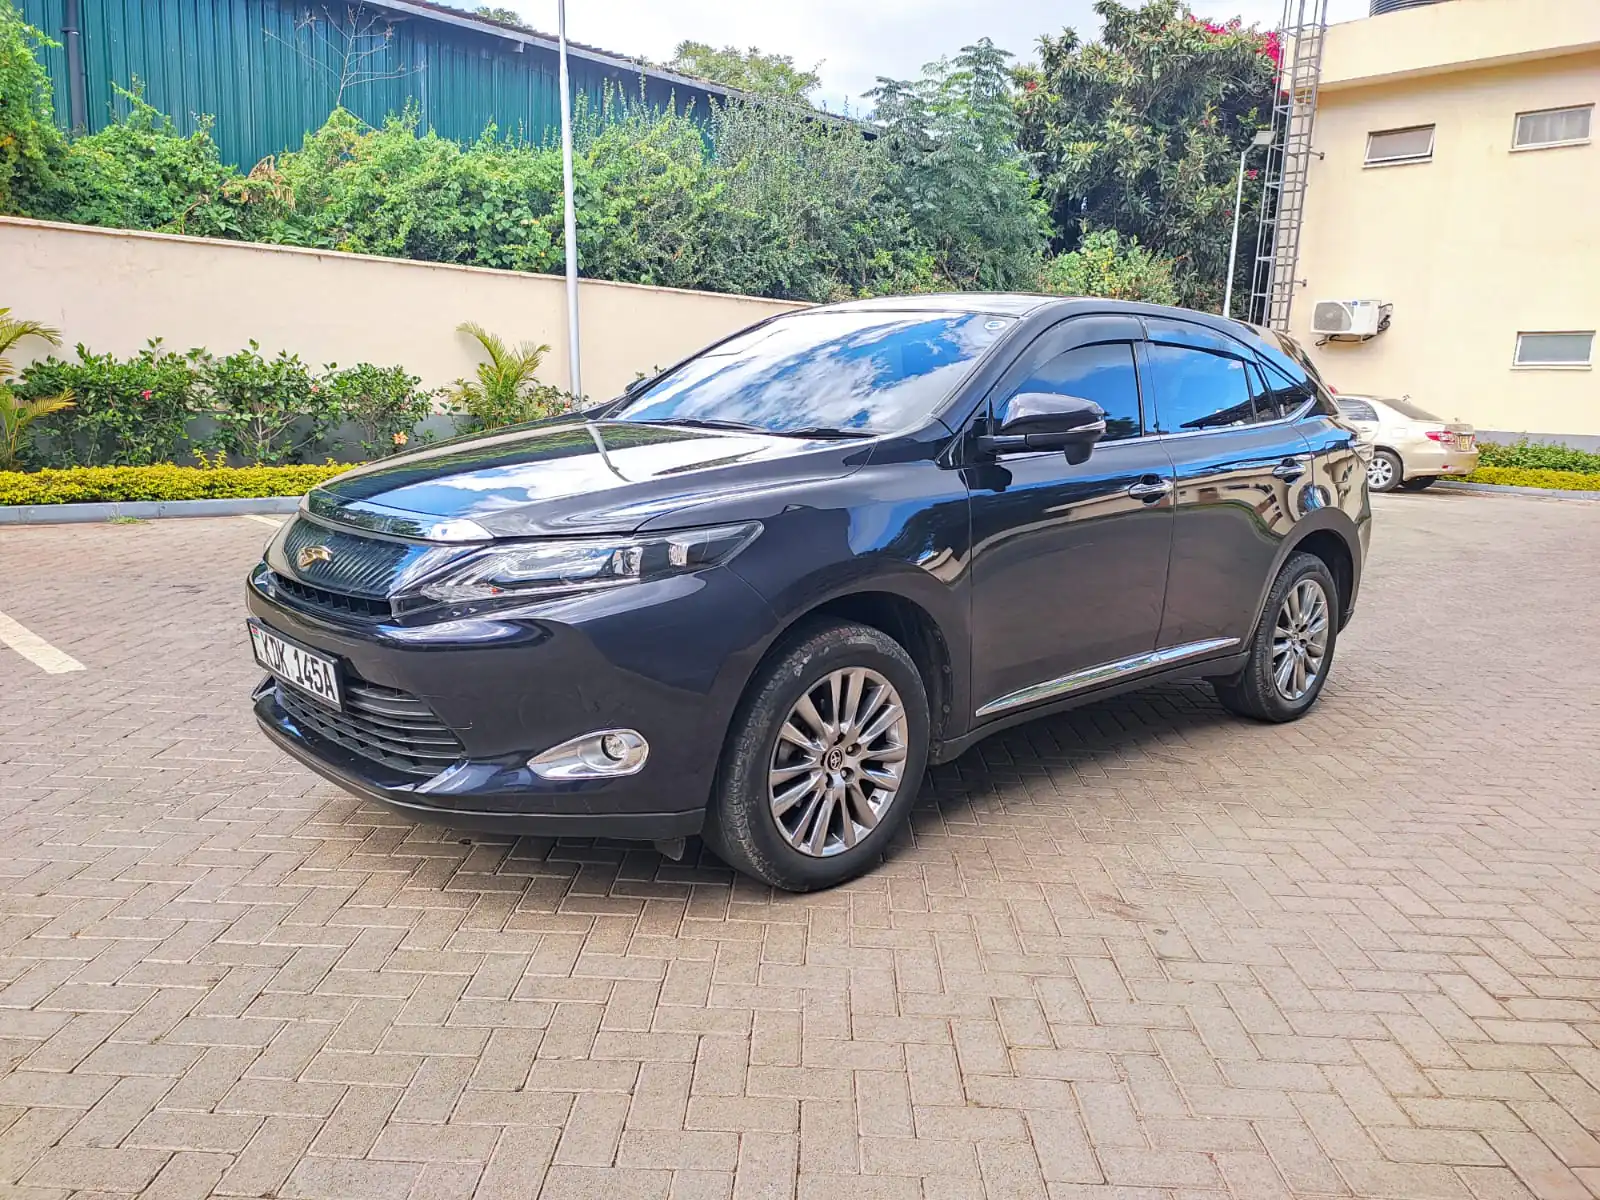 Toyota Harrier new shape CHEAPEST You Pay 30% Deposit Trade in OK EXCLUSIVE